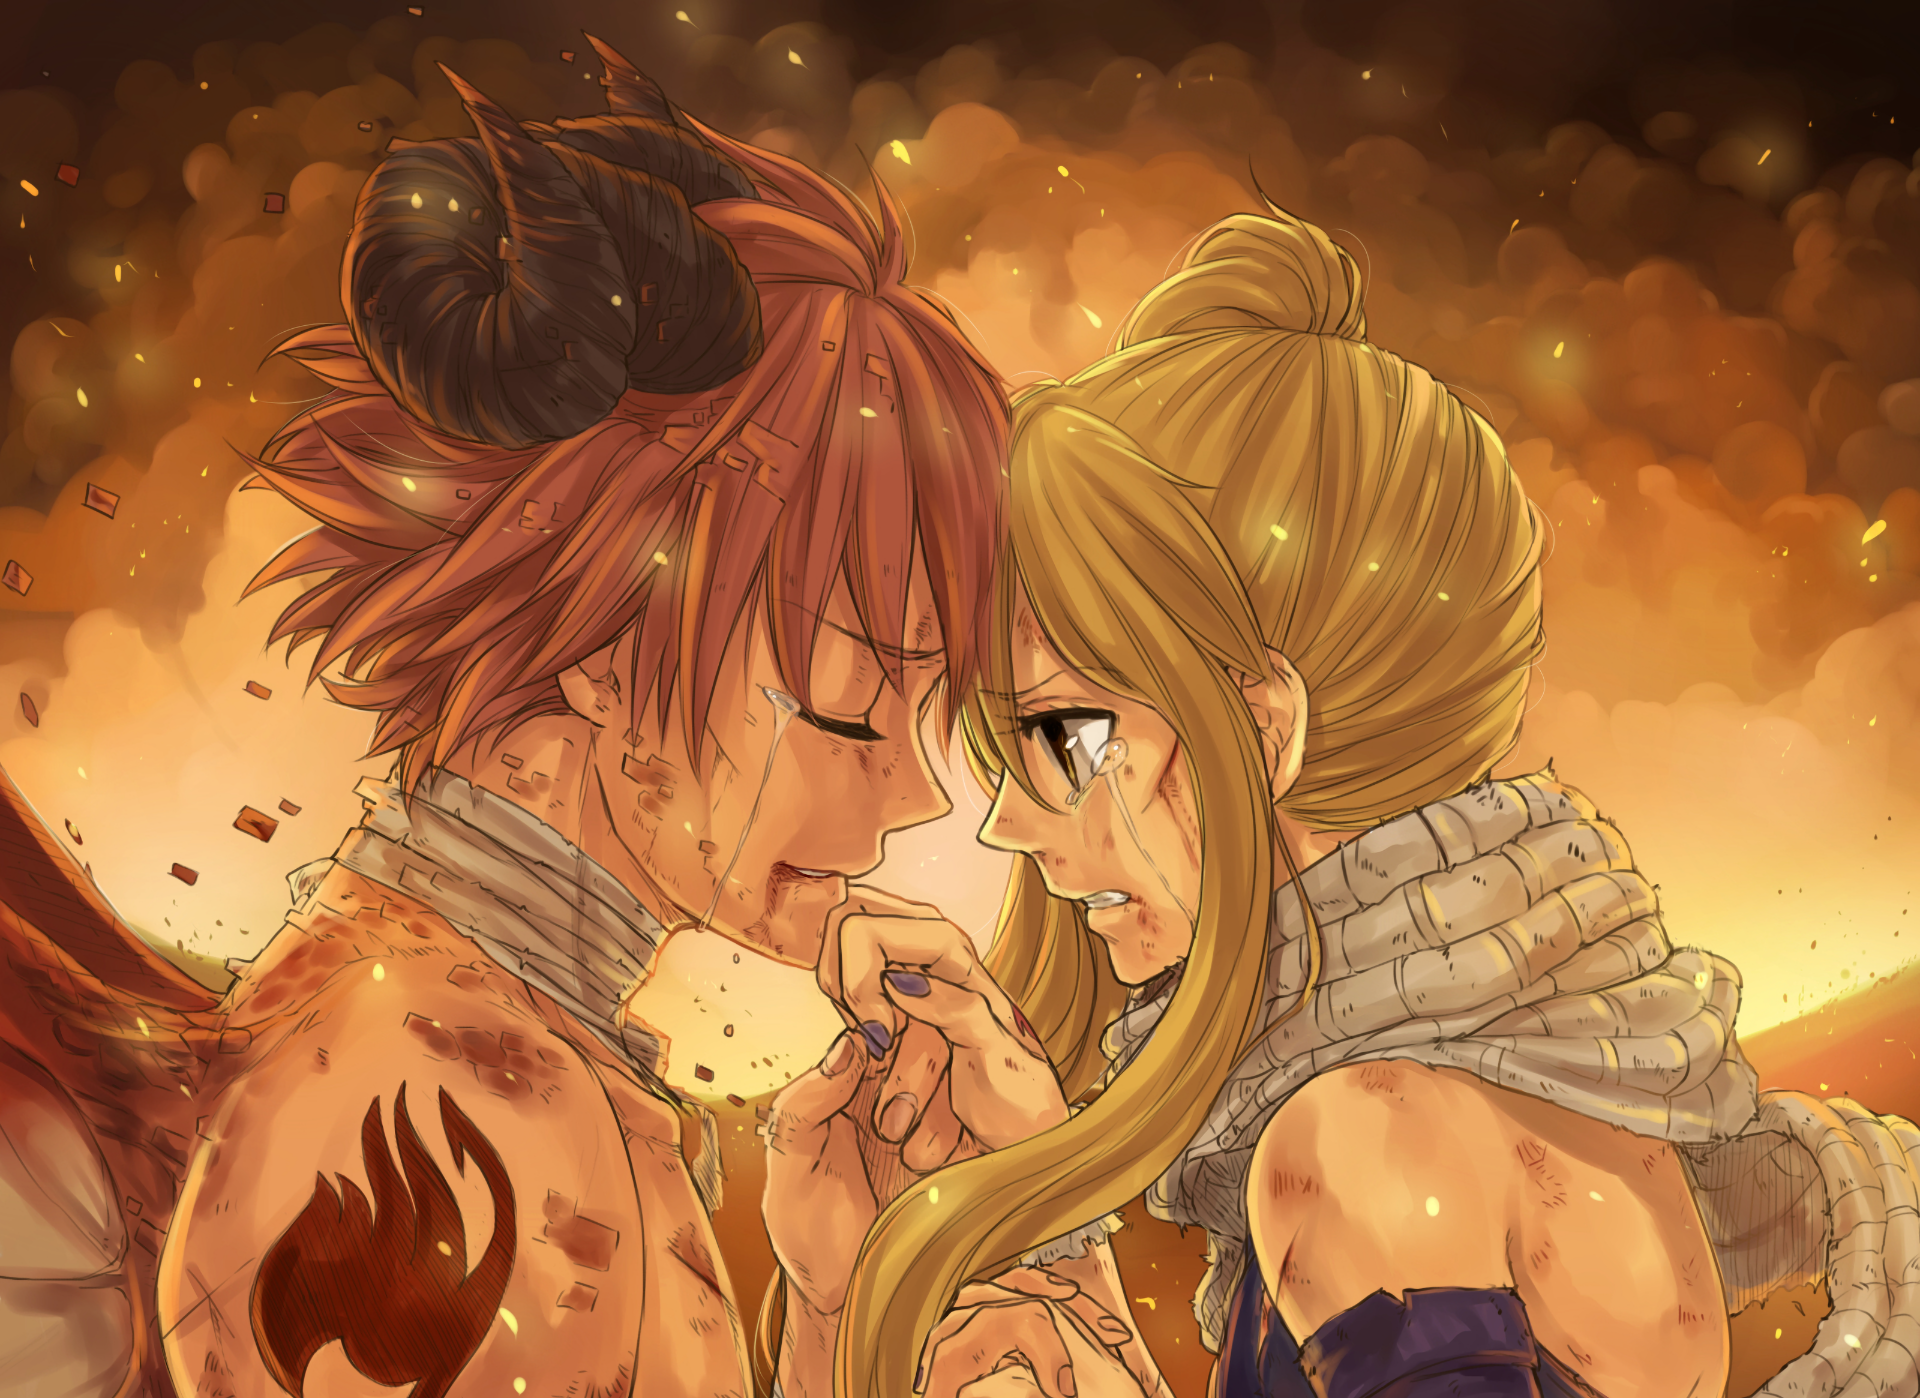 Anime Fairy Tail Wallpapers - Fairy Tail - 1920x1398 Wallpaper 